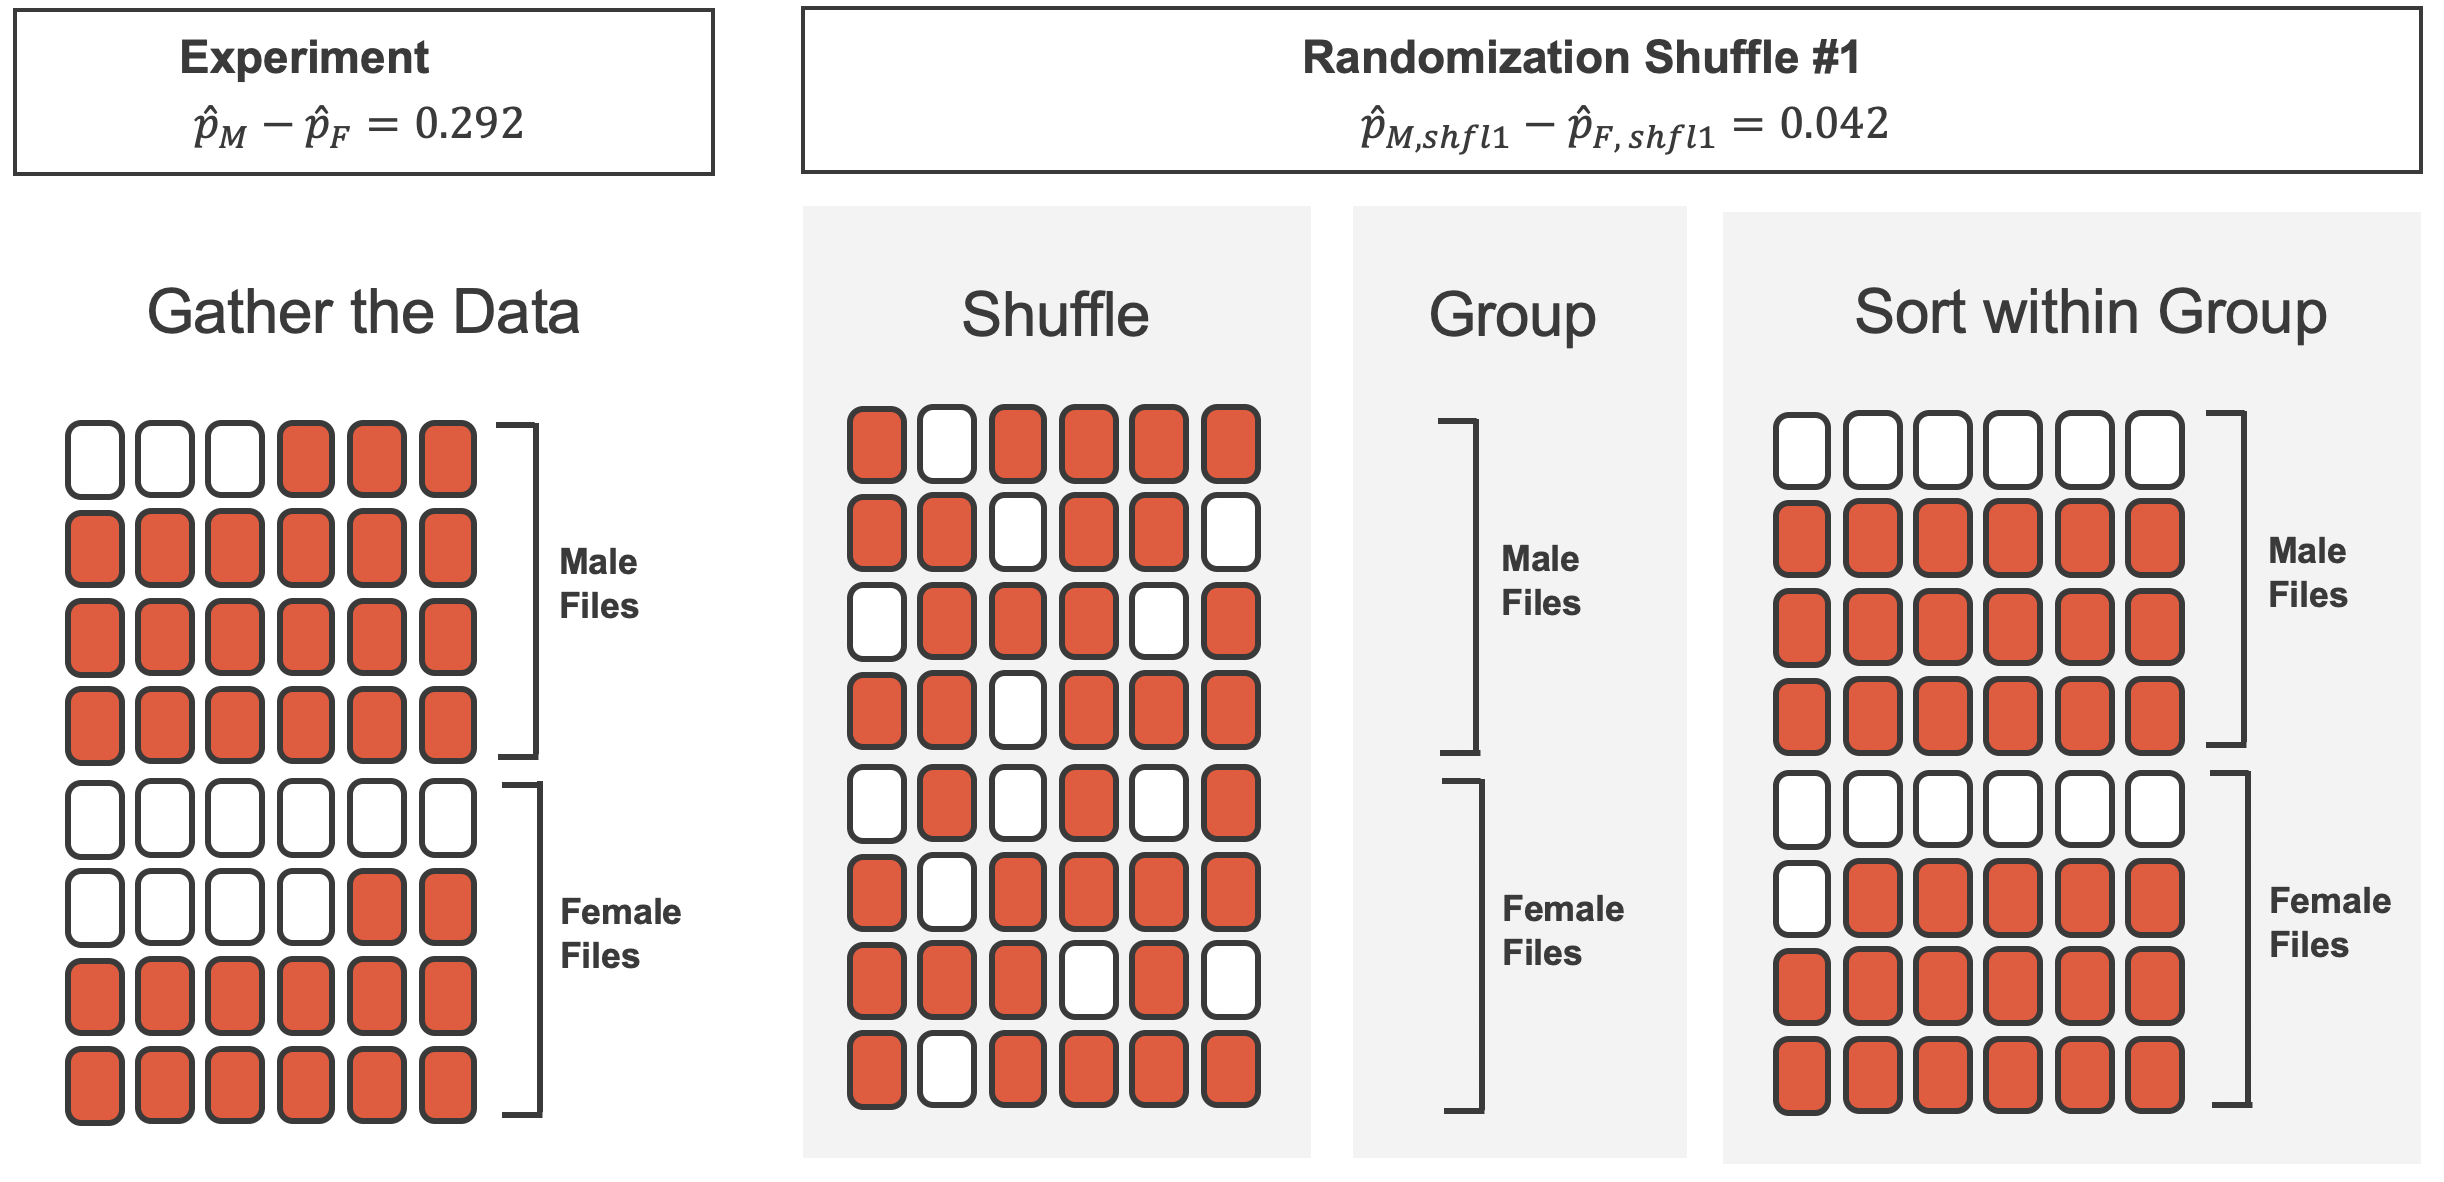 The 48 red and white cards are show in three panels.  The first panel represents the original data and original allocation of the male and female files (in the original data there are 3 white cards in the male group and 10 white cards in the female group).  The second panel represents the shuffled red and white cards that are randomly assigned as male and female files.  The third panel has the cards sorted according to the random assignment of female or male.  In the third panel there are 6 white cards in the male group and 7 white cards in the female group.